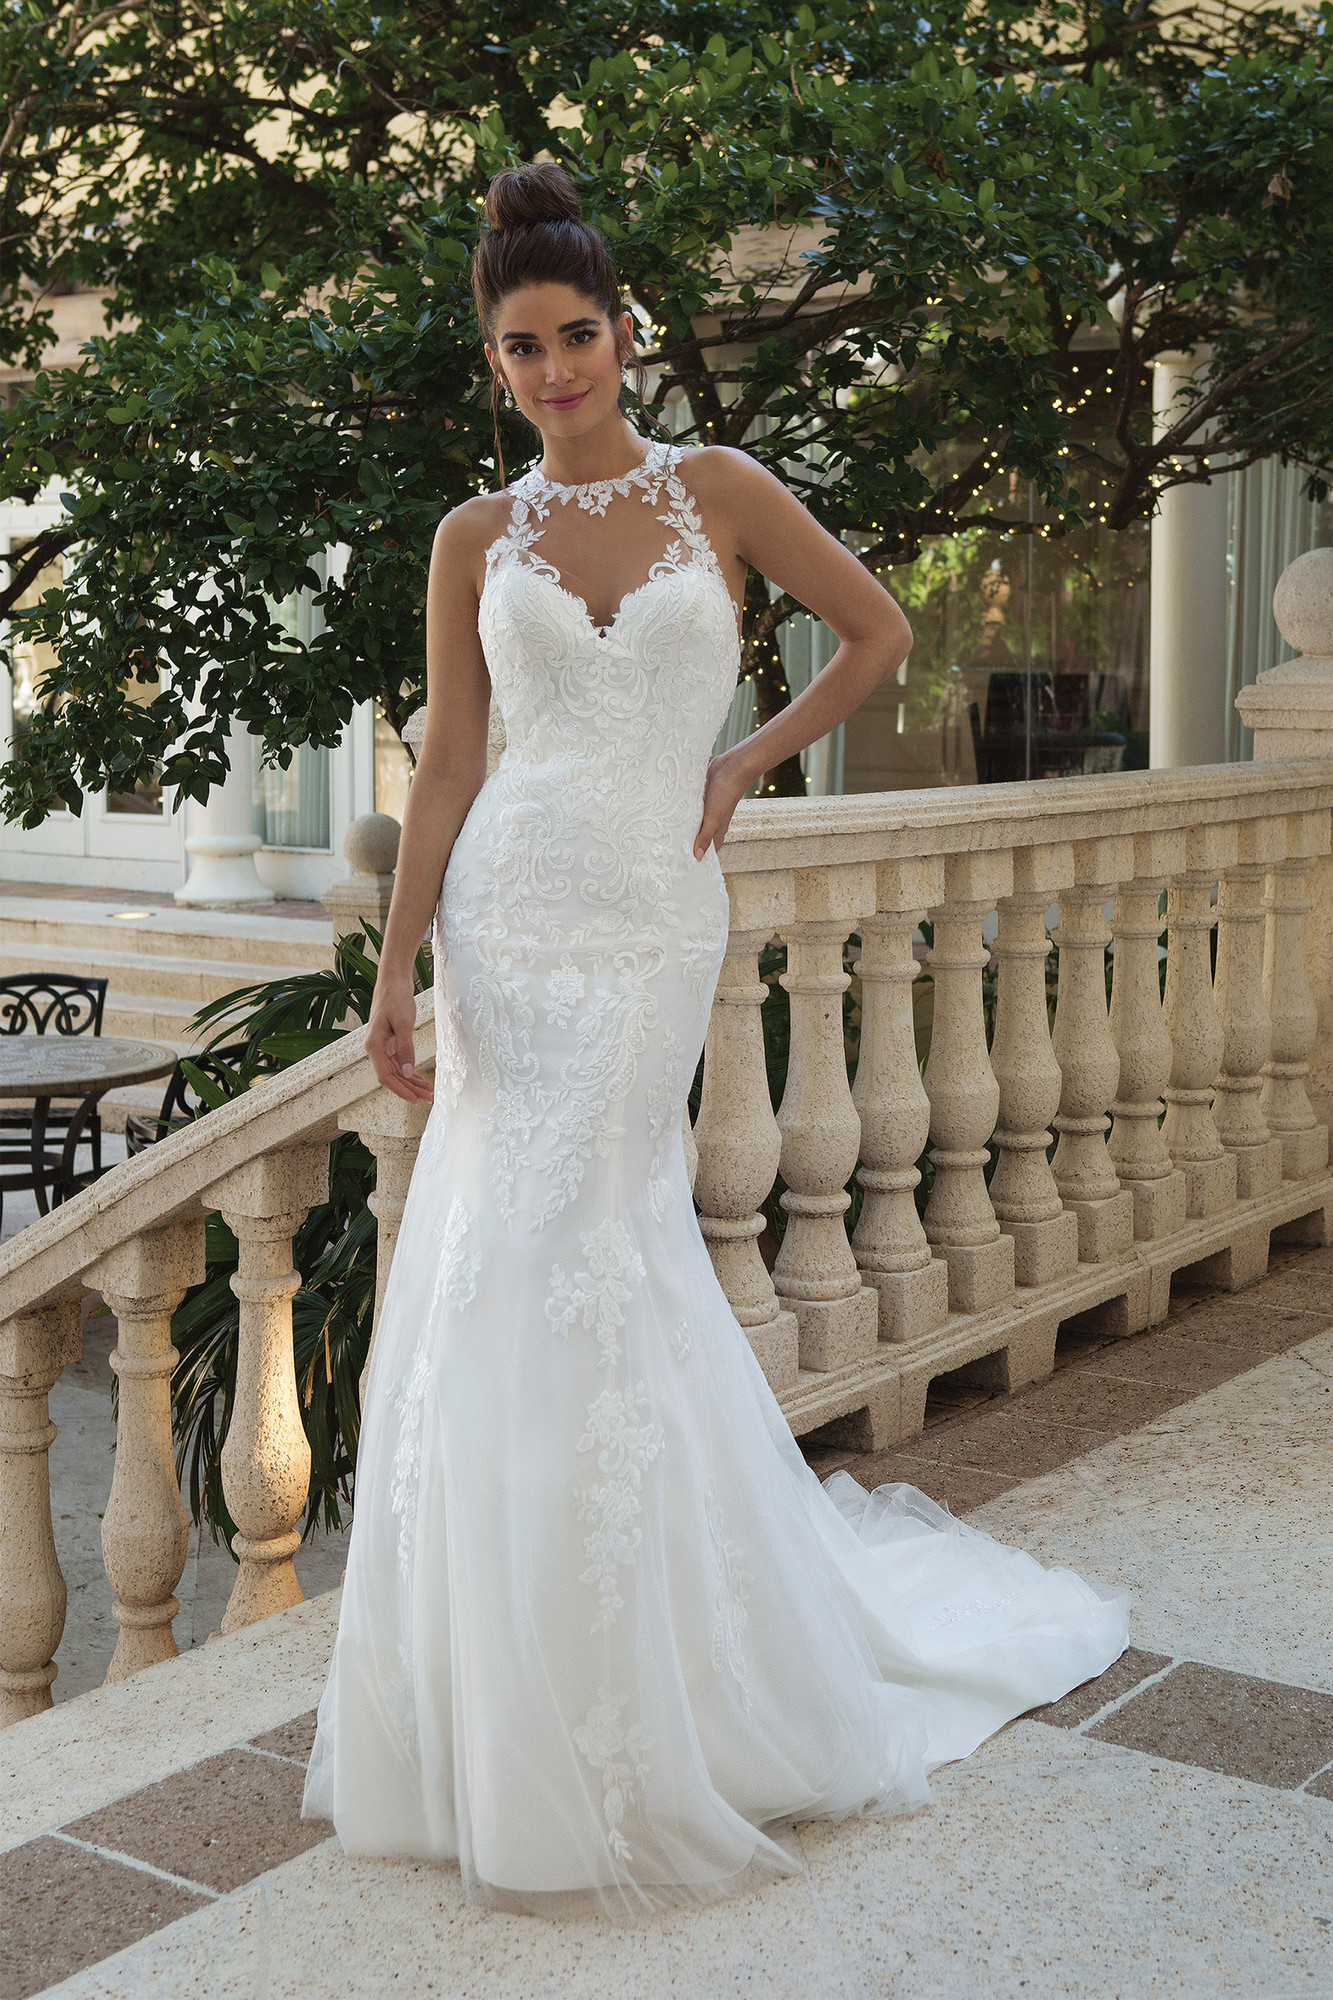 Bridal Wedding Dresses Style Mb1022 In Ivory Or White Color - Photos